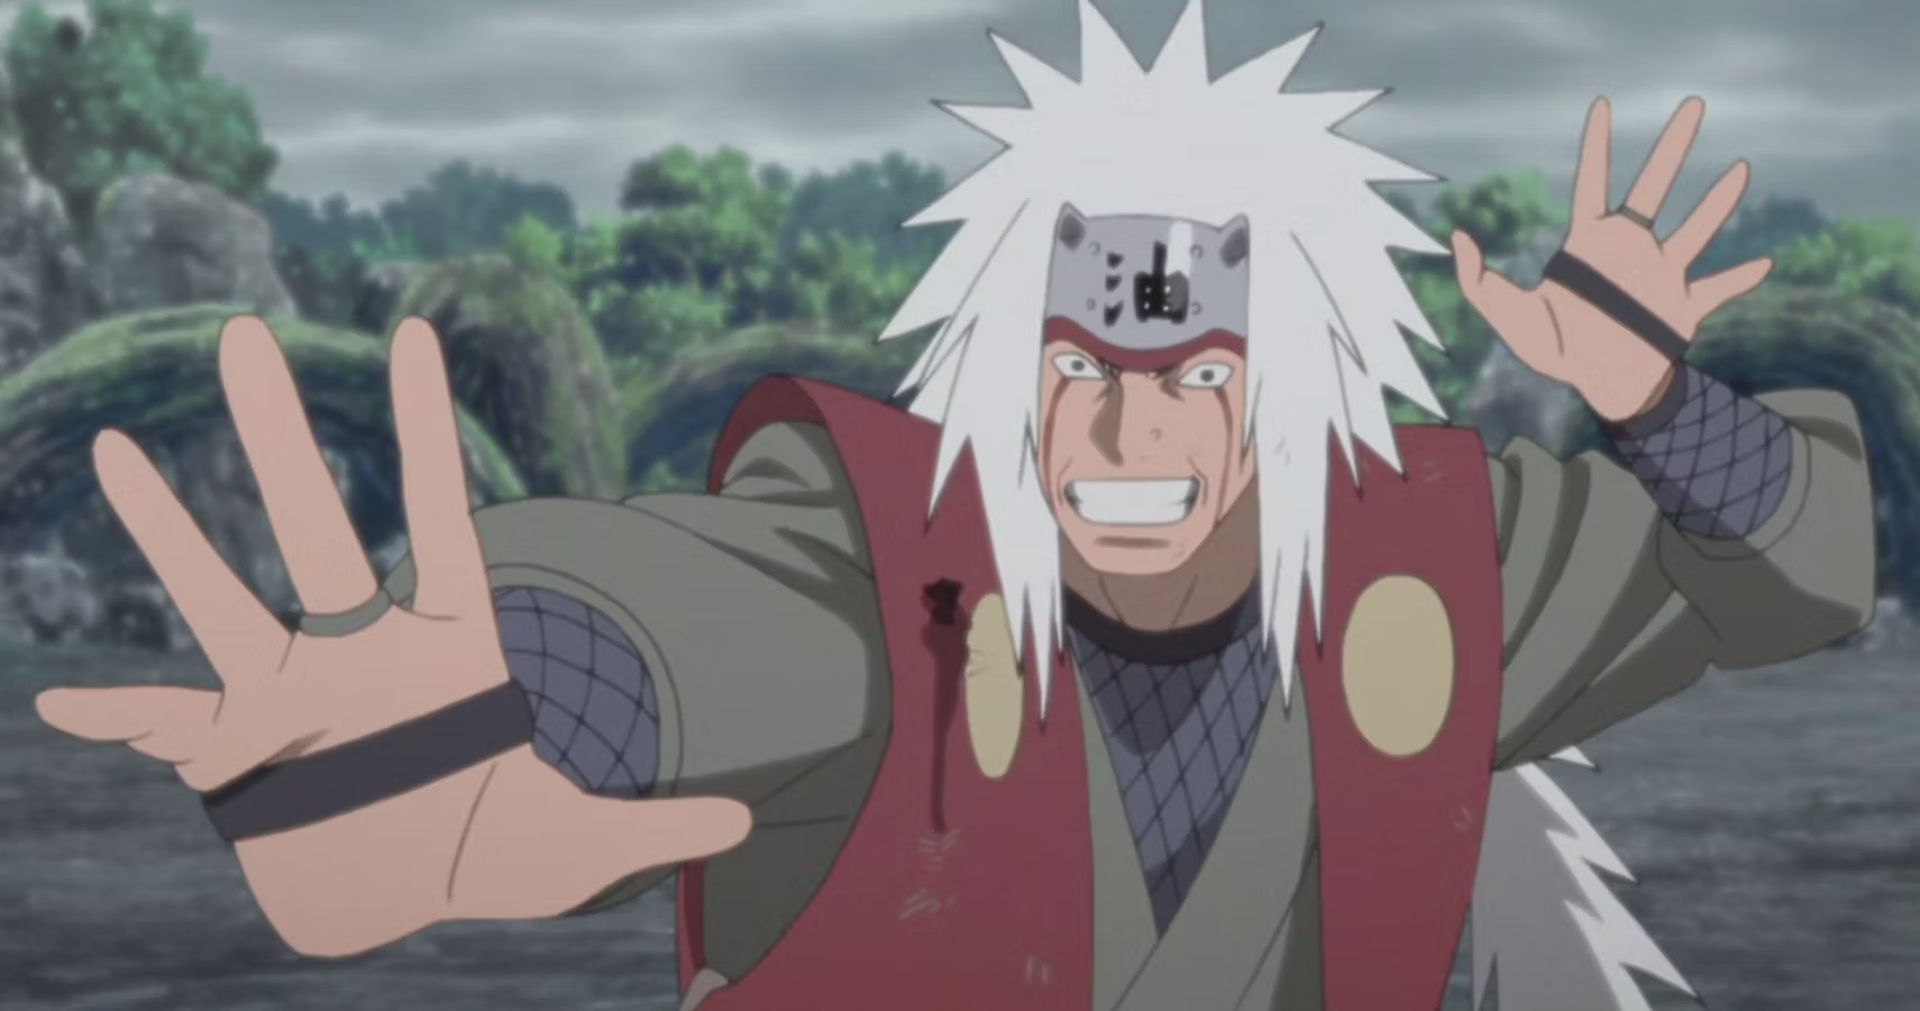 In this article, we are going to be ranking the 25 strongest characters in Naruto from worst to best so you know the definitive tier list in the Naruto series.